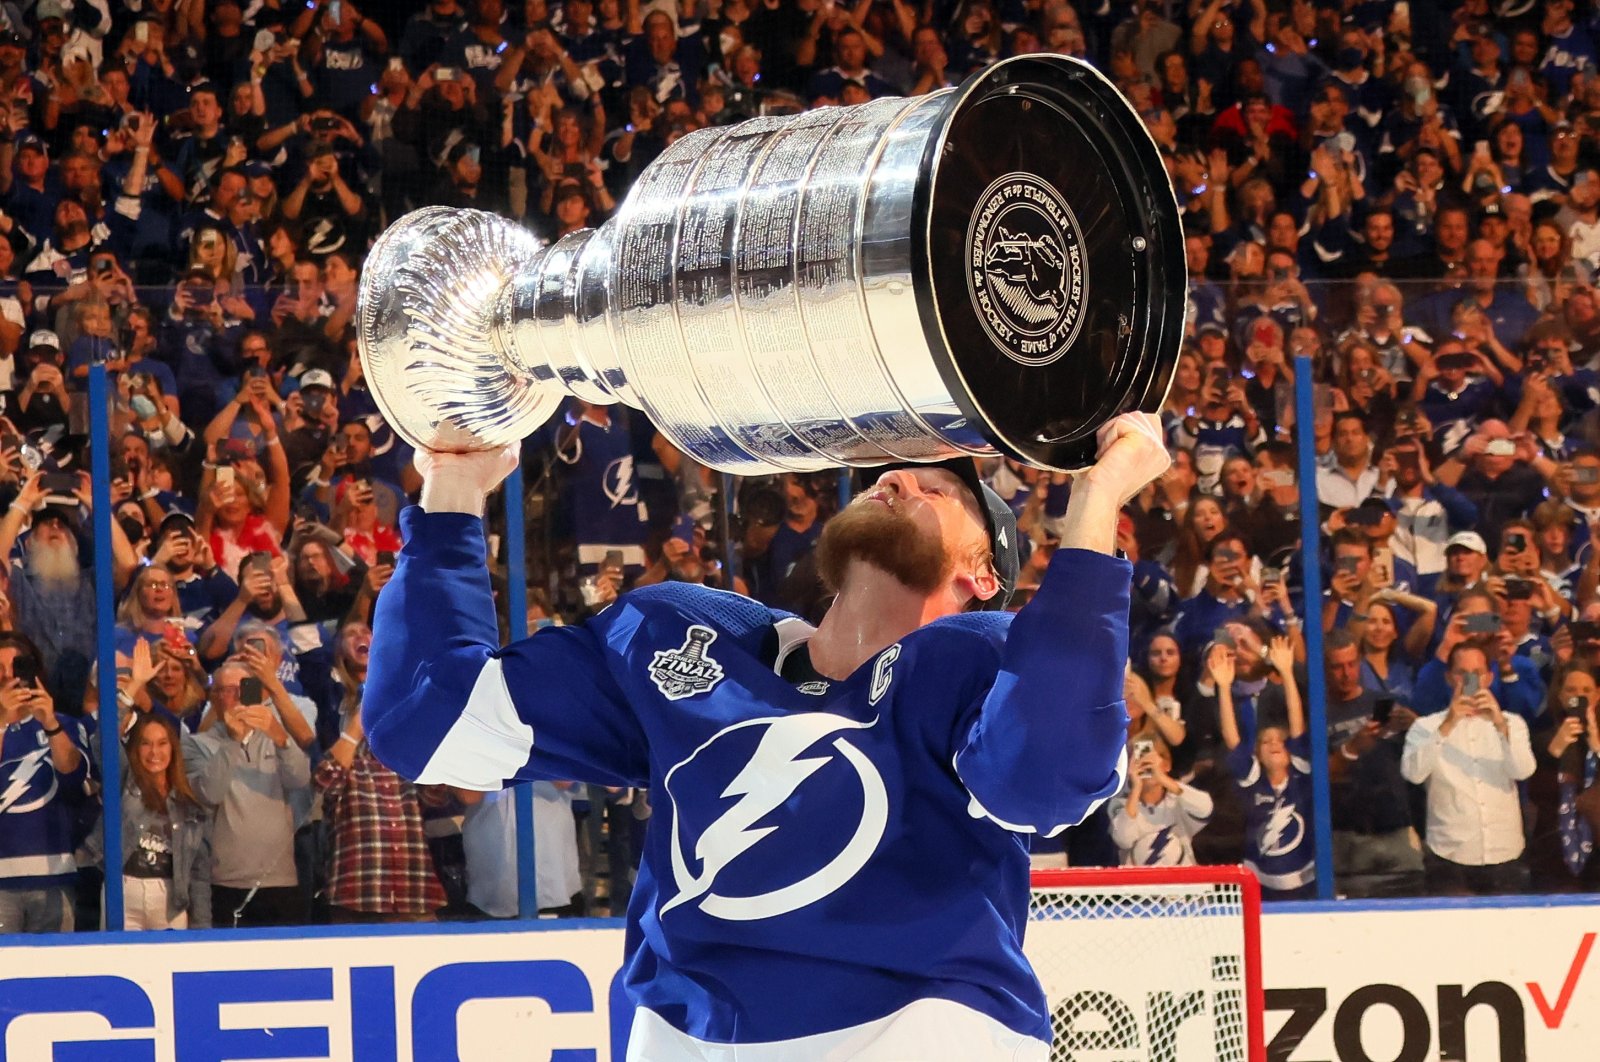 Steven Stamkos of the Tampa Bay Lightning hoists the Stanley Cup after the 1-0 victory against the Montreal Canadiens in Game 5 to win the 2021 NHL Stanley Cup Final at Amalie Arena, Tampa, Florida, July 7, 2021. (AFP Photo)